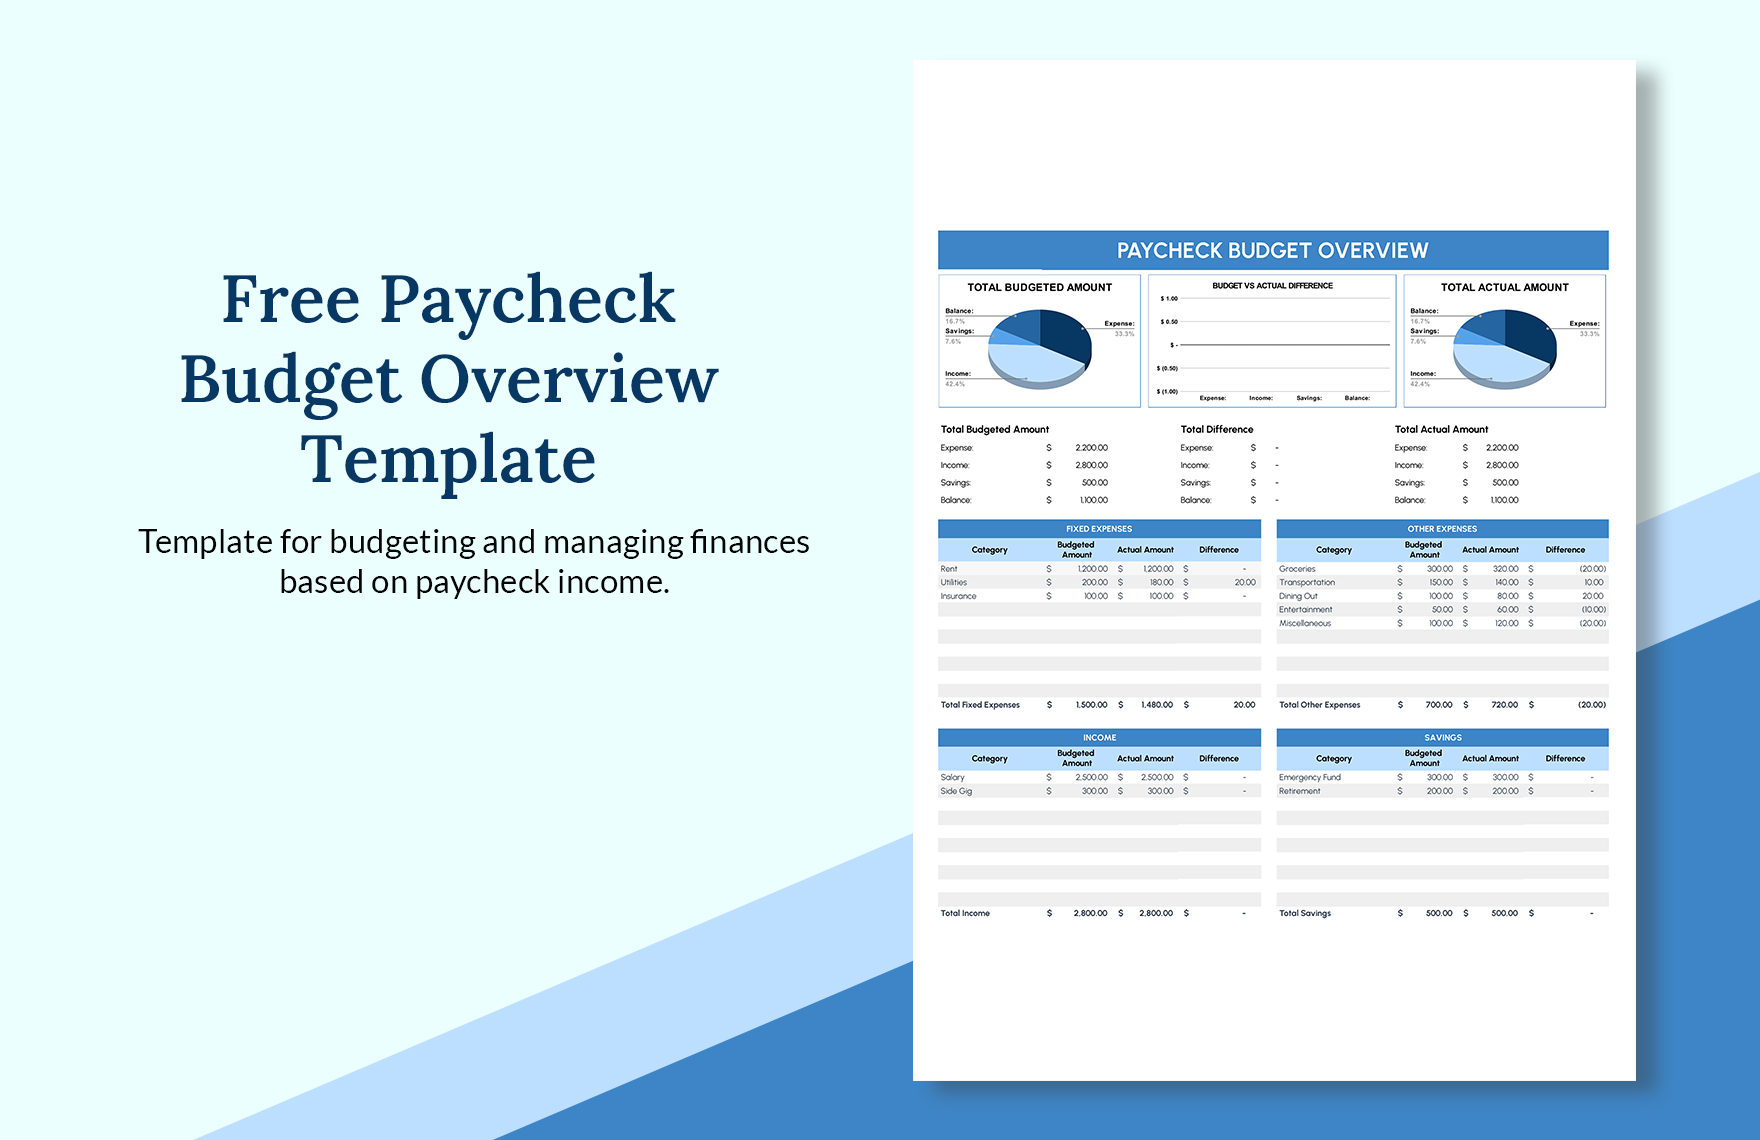 Free Paycheck Budget Overview Template in Excel, Google Sheets